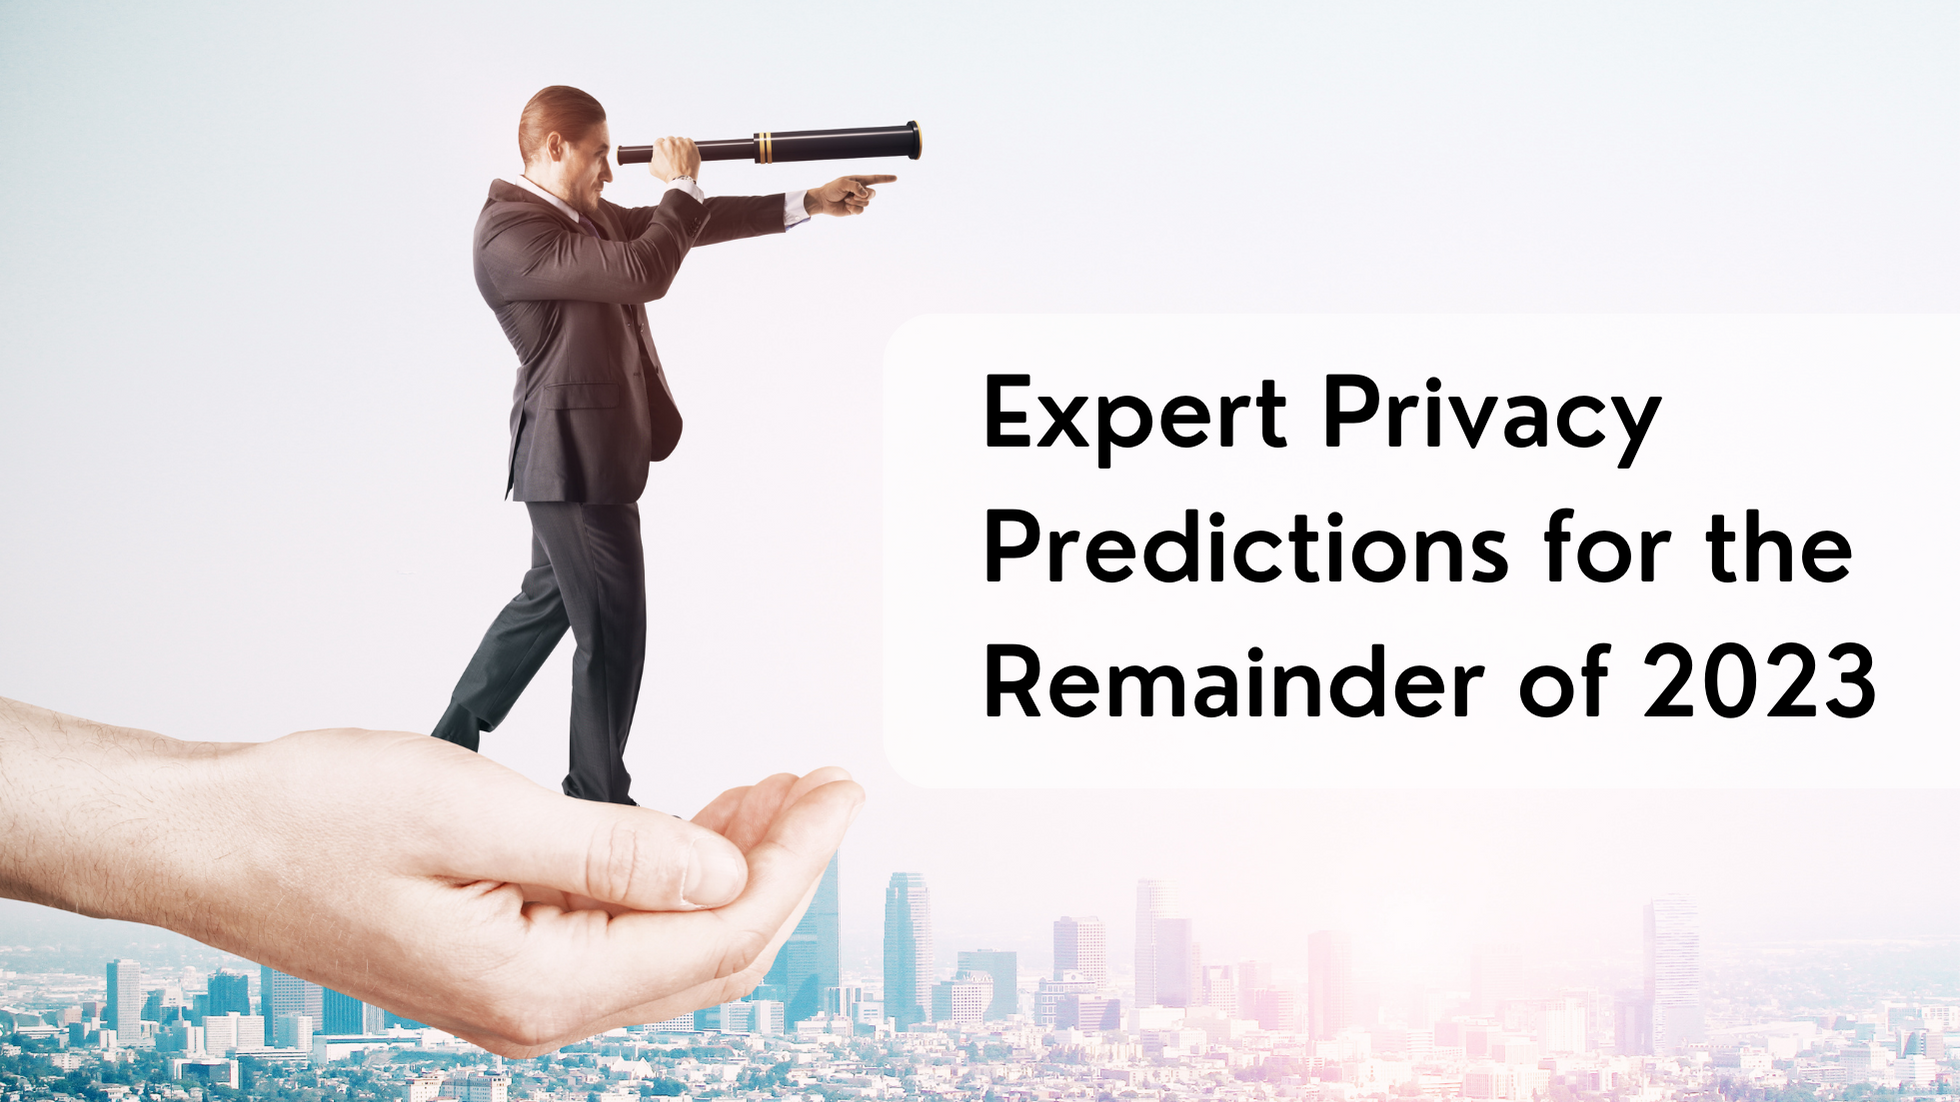 Expert Privacy Predictions for the Remainder of 2023